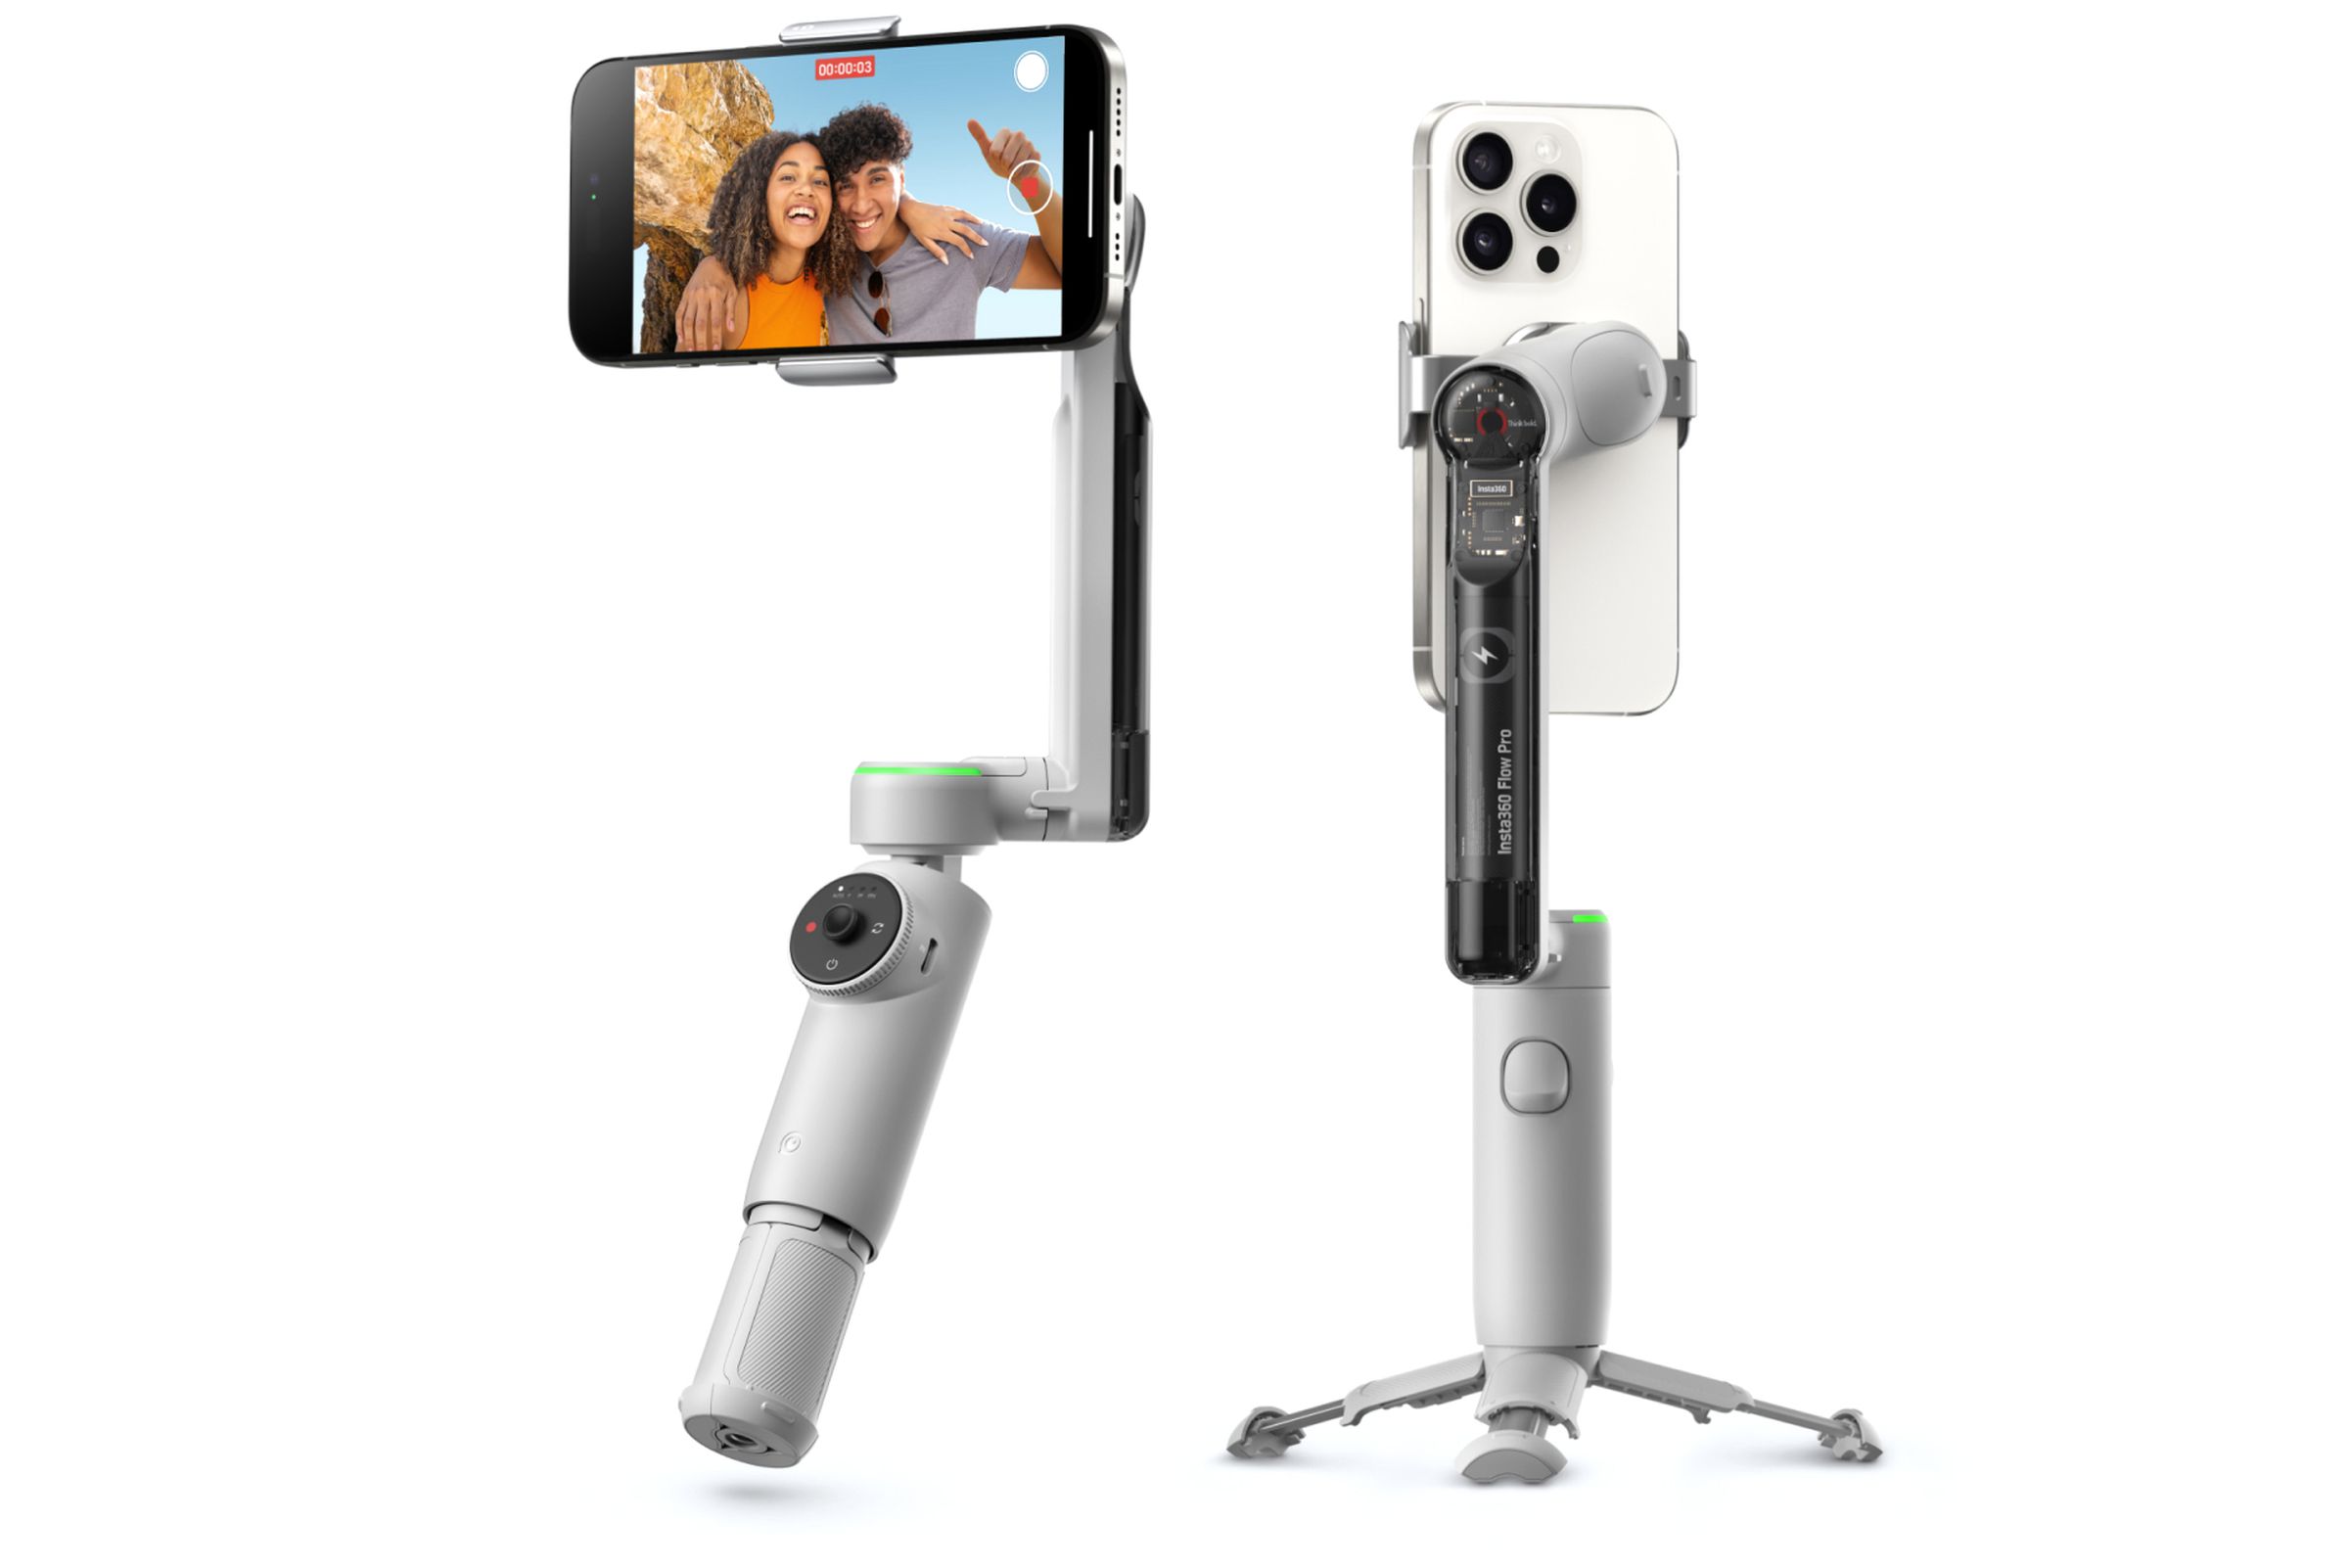 The front and back of the Insta360 Flow Pro with a smartphone attached.